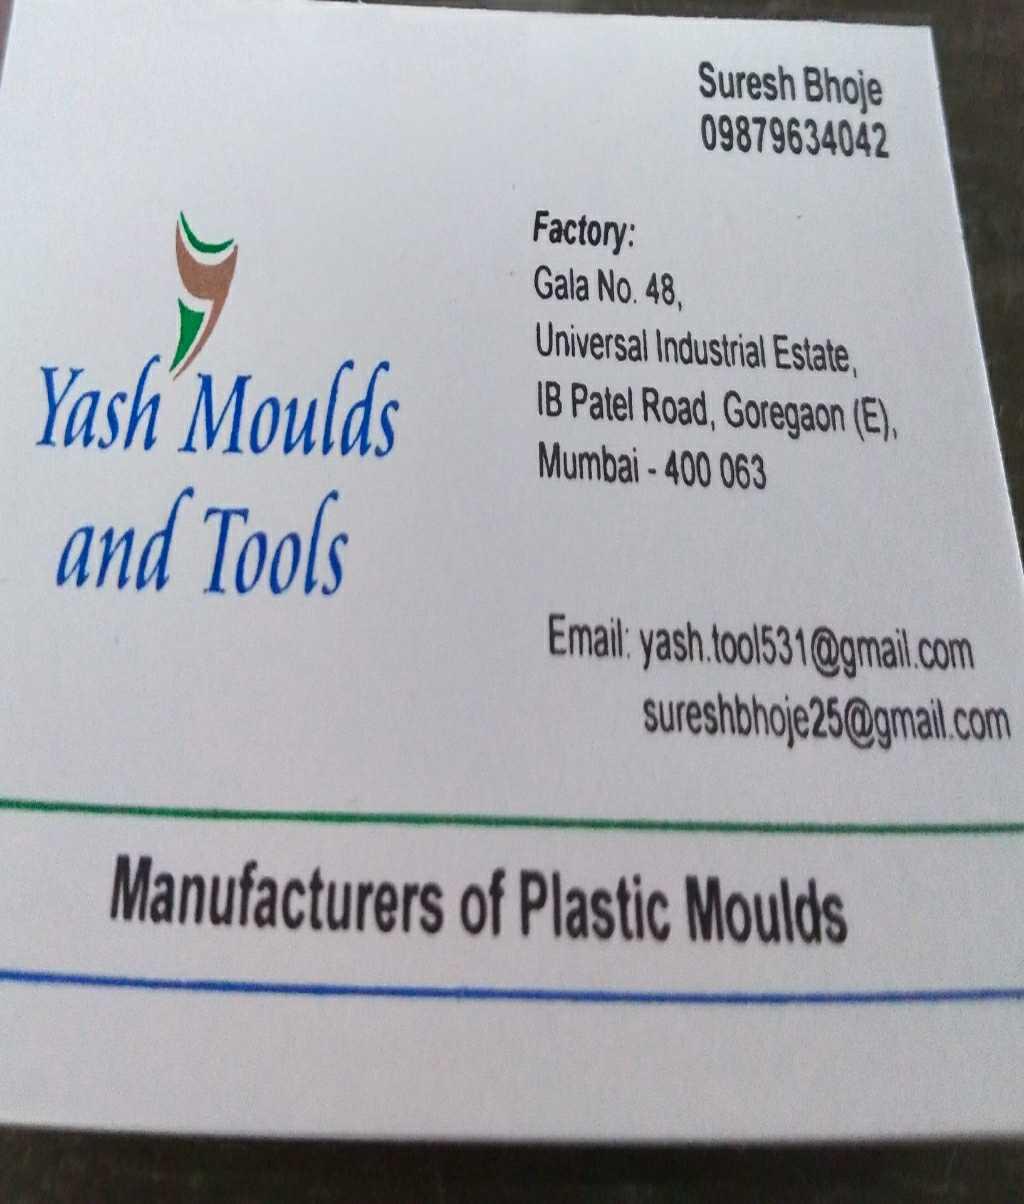 YASH MOULDS AND TOOLS